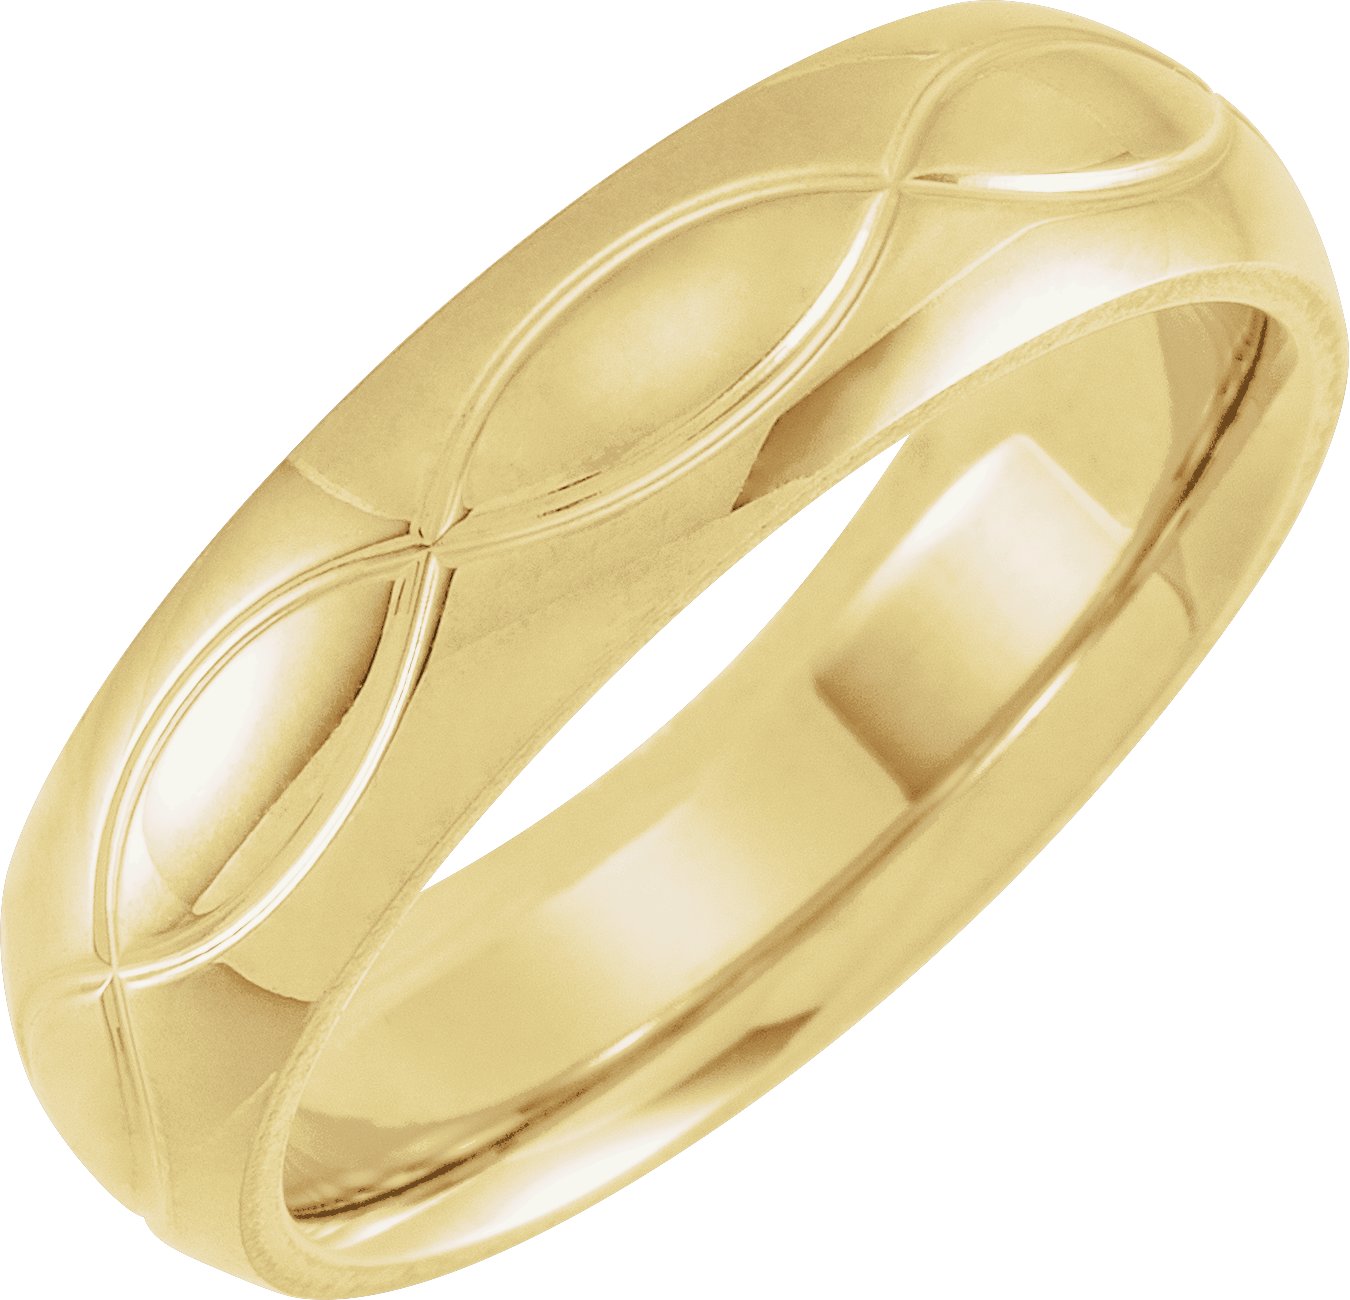 14K Yellow 6 mm Infinity Patterned Band Size 11.5